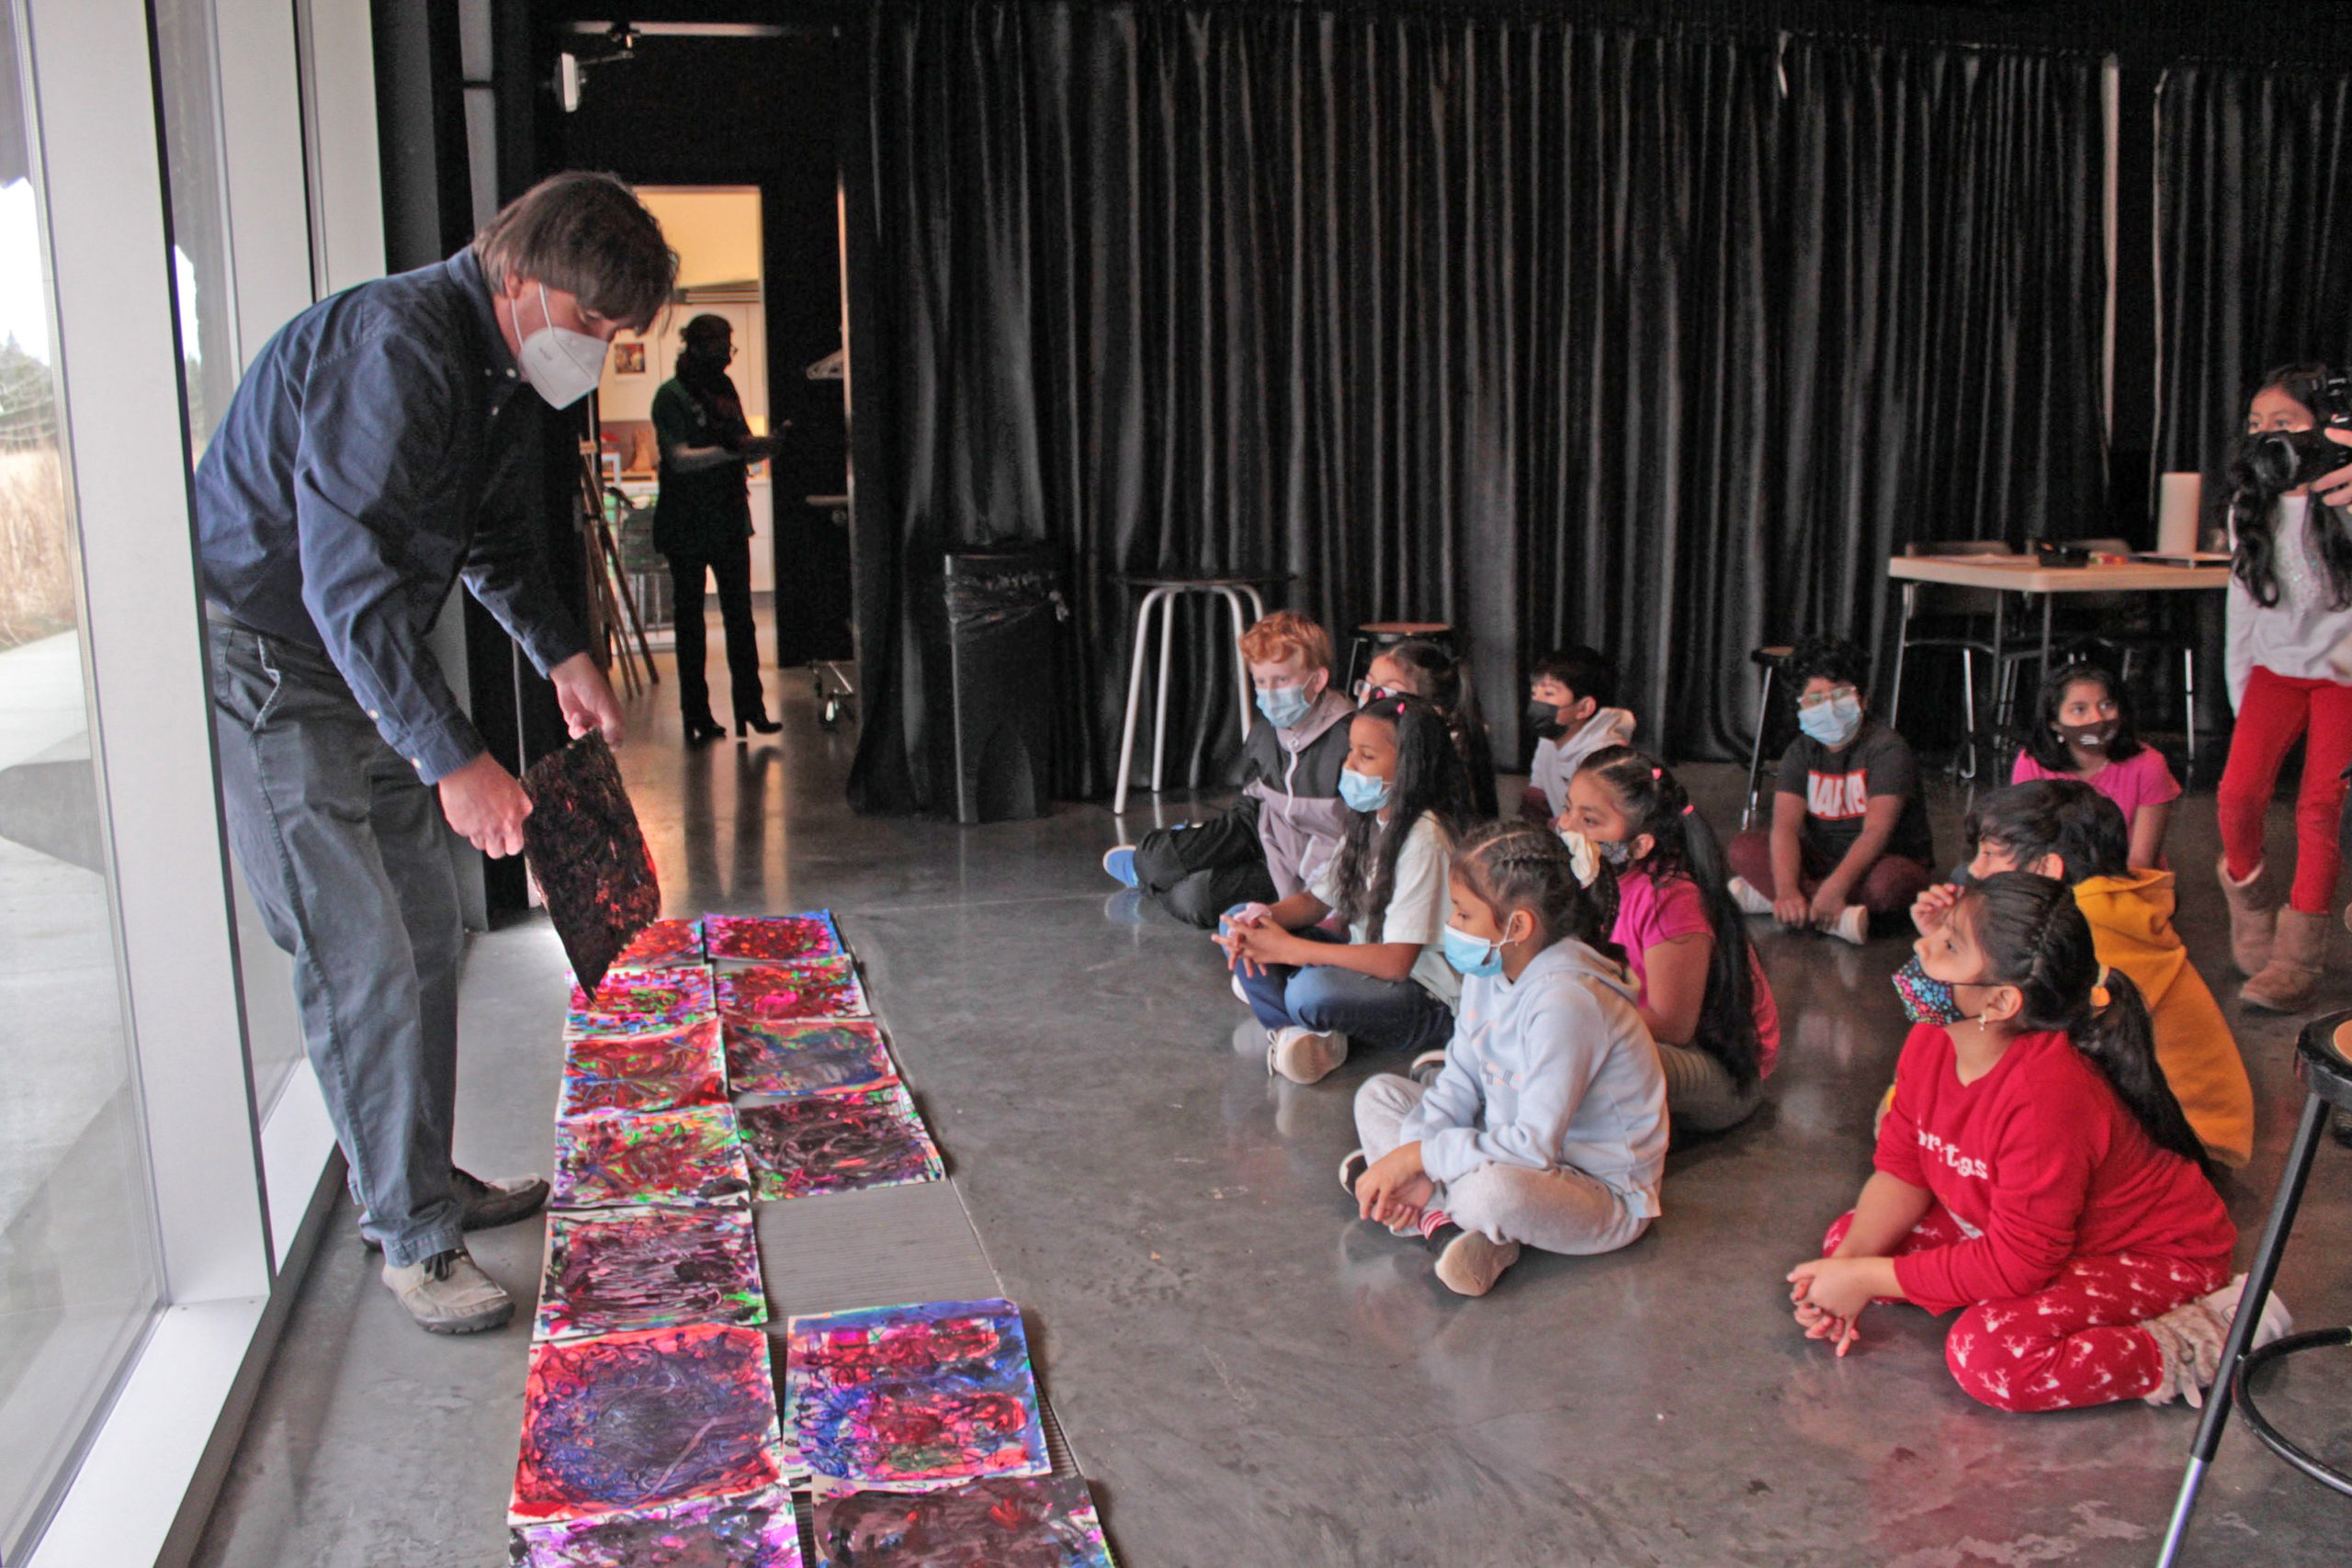 Artist Eric Dever leading students in 